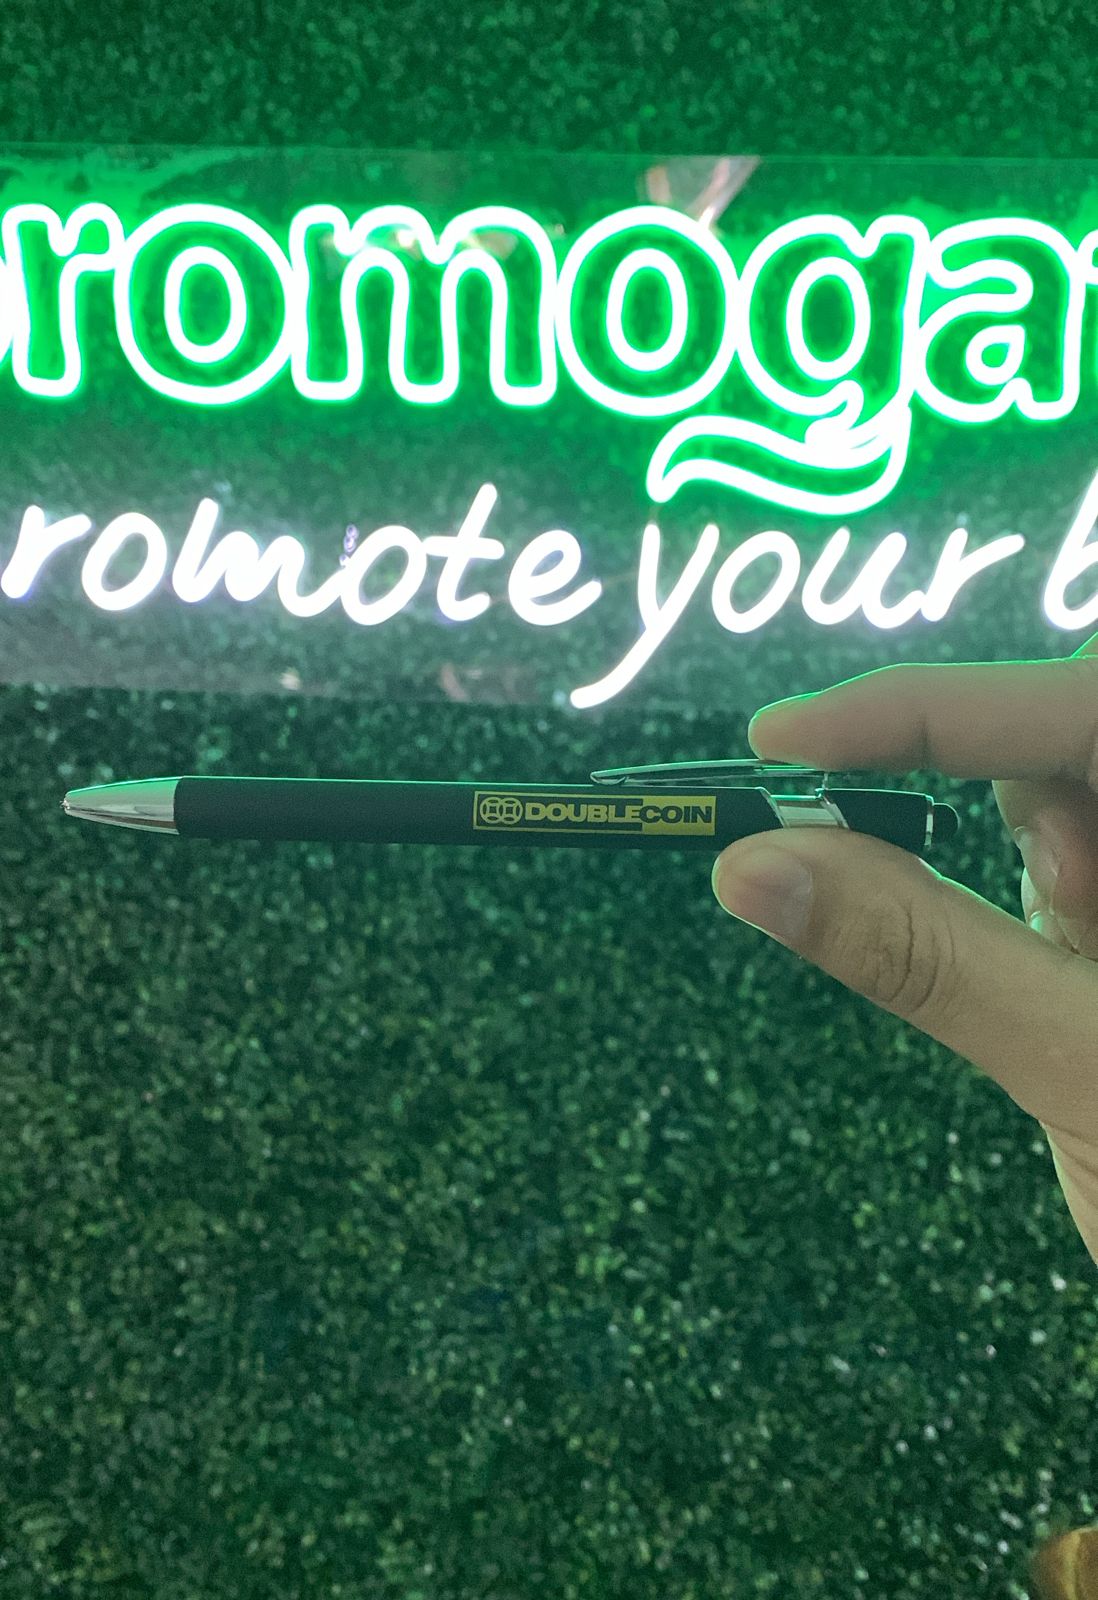 Brand Power with Custom Printed Promotional Pens from Promogator.com